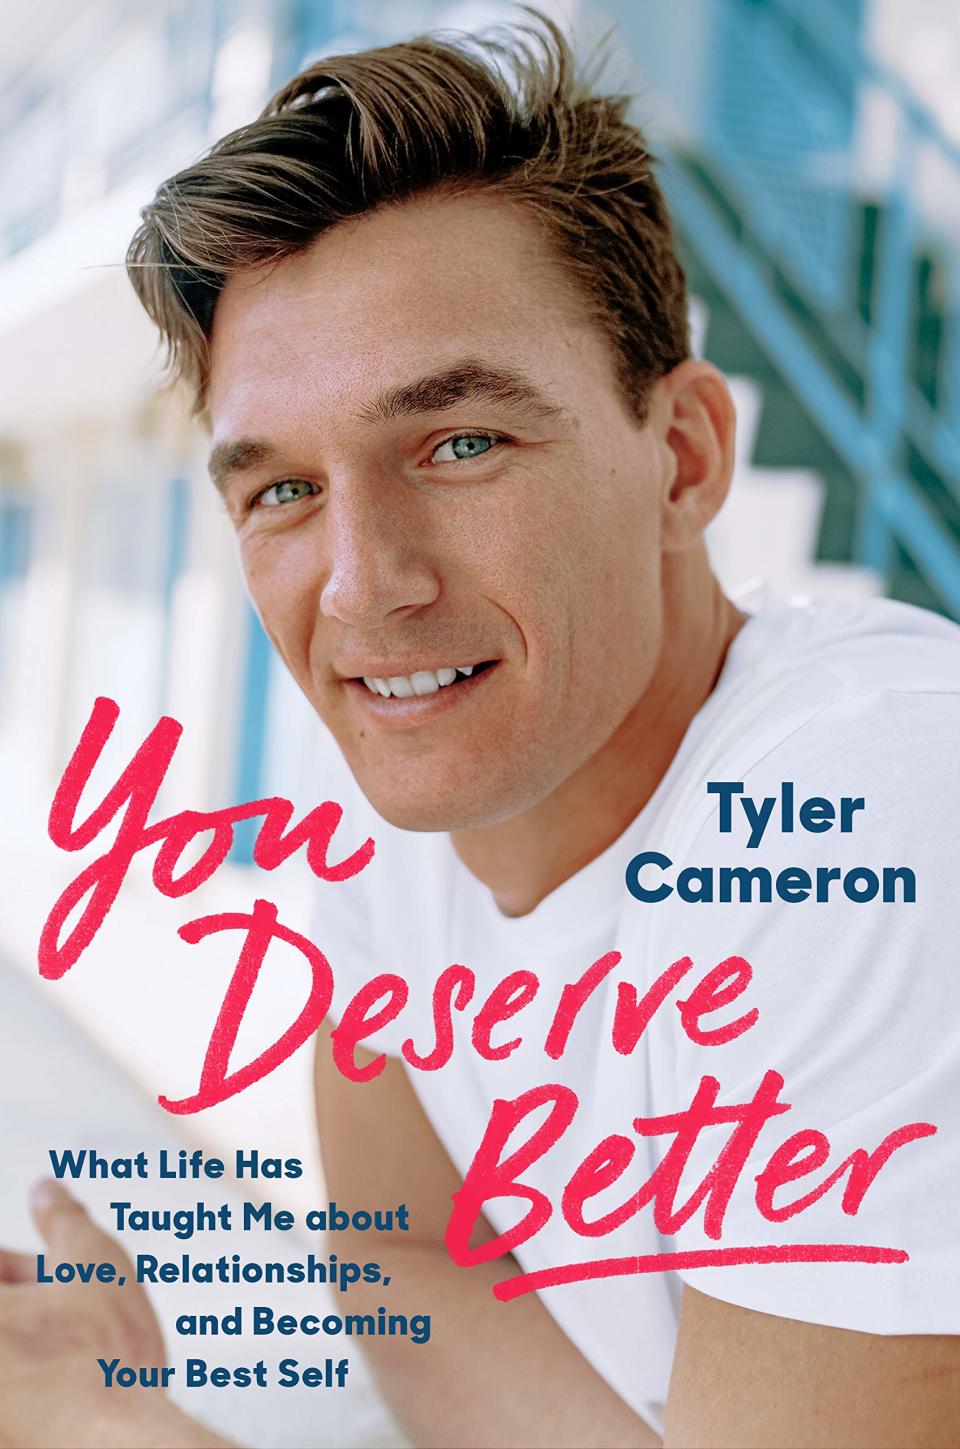 "You Deserve Better" by Tyler Cameron